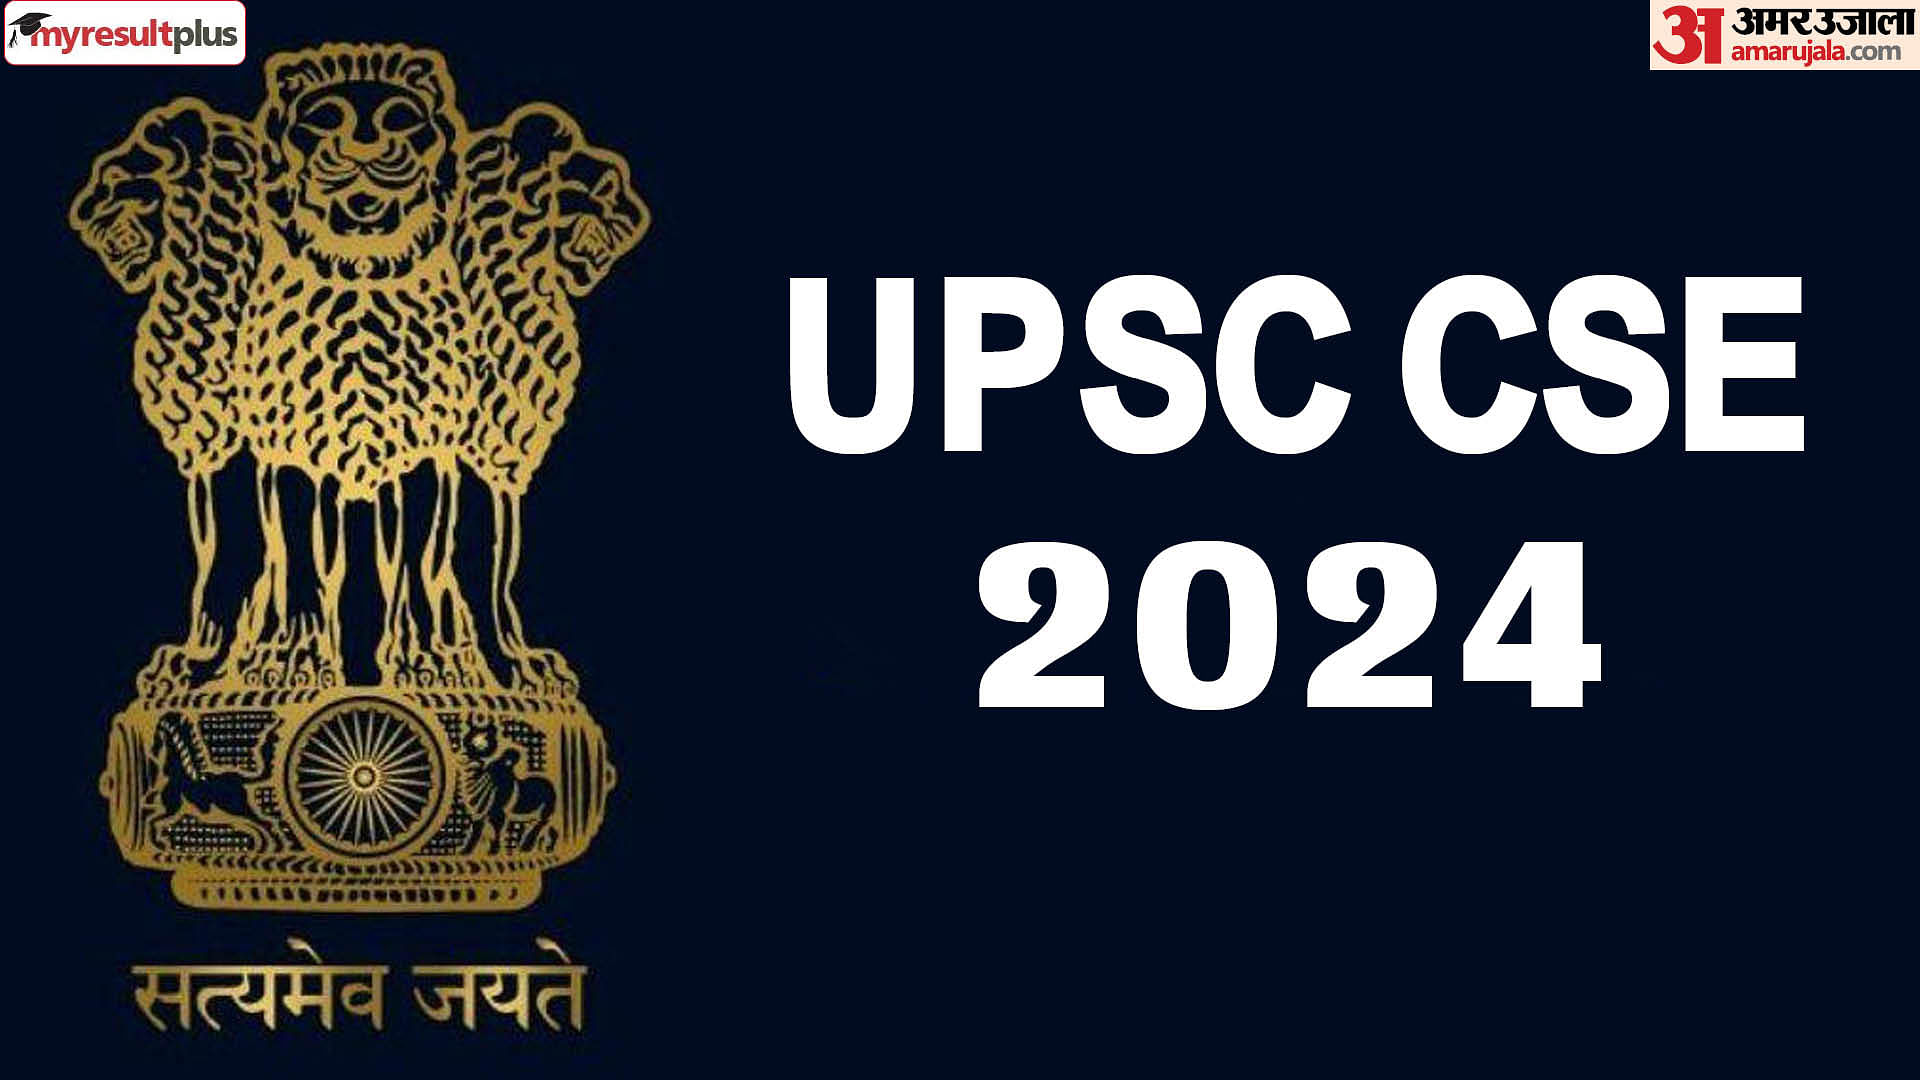 UPSC CSE 2024 admit card: releasing soon, Check exam pattern and other details here